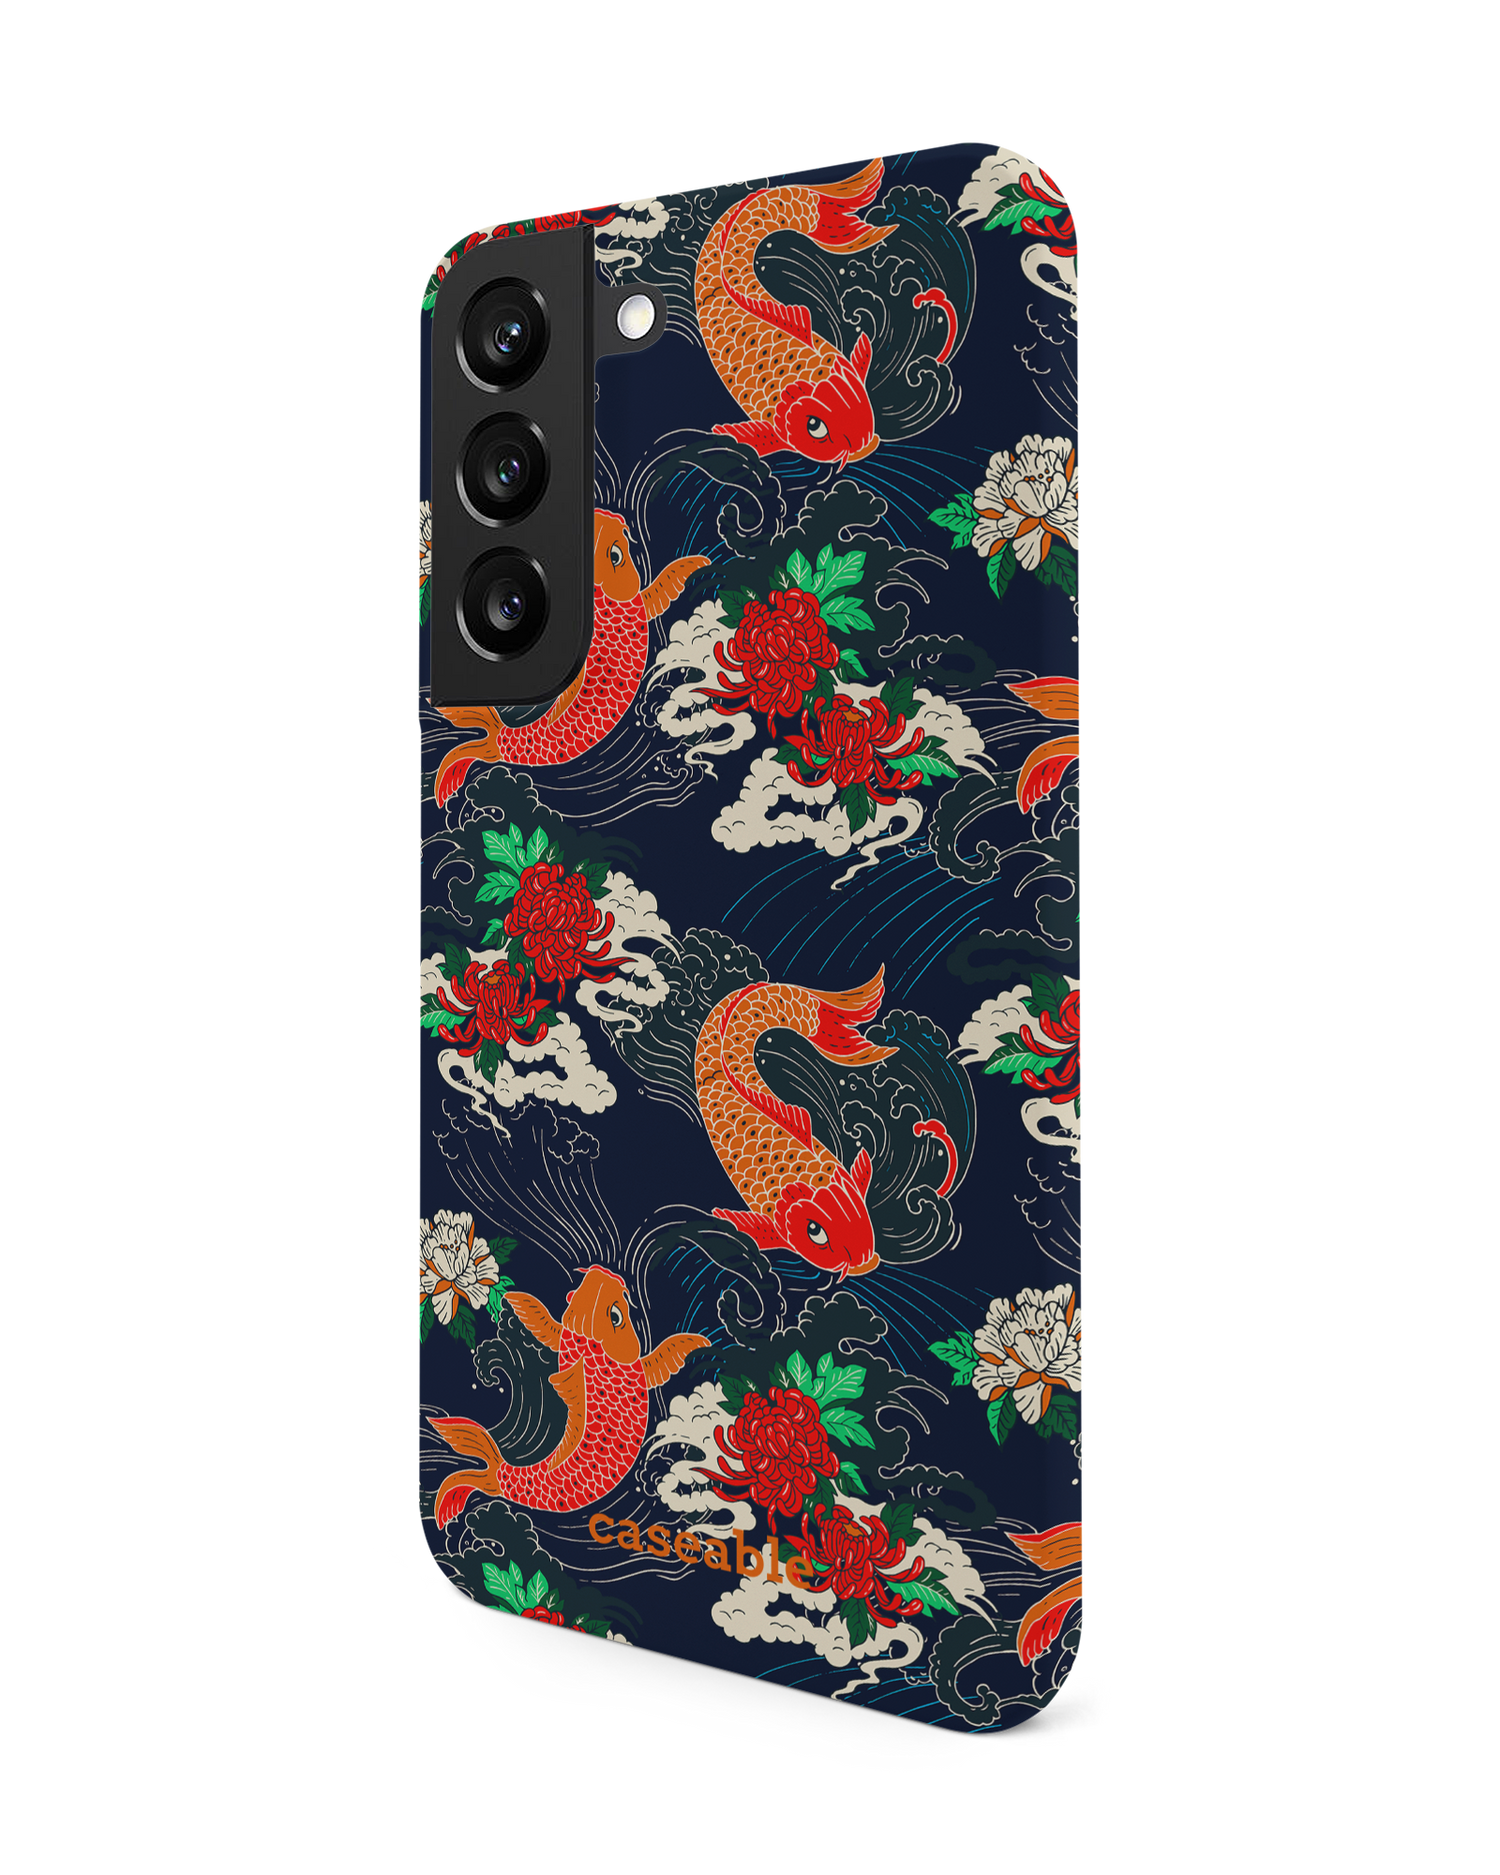 Repeating Koi Hard Shell Phone Case Samsung Galaxy S22 5G: View from the right side